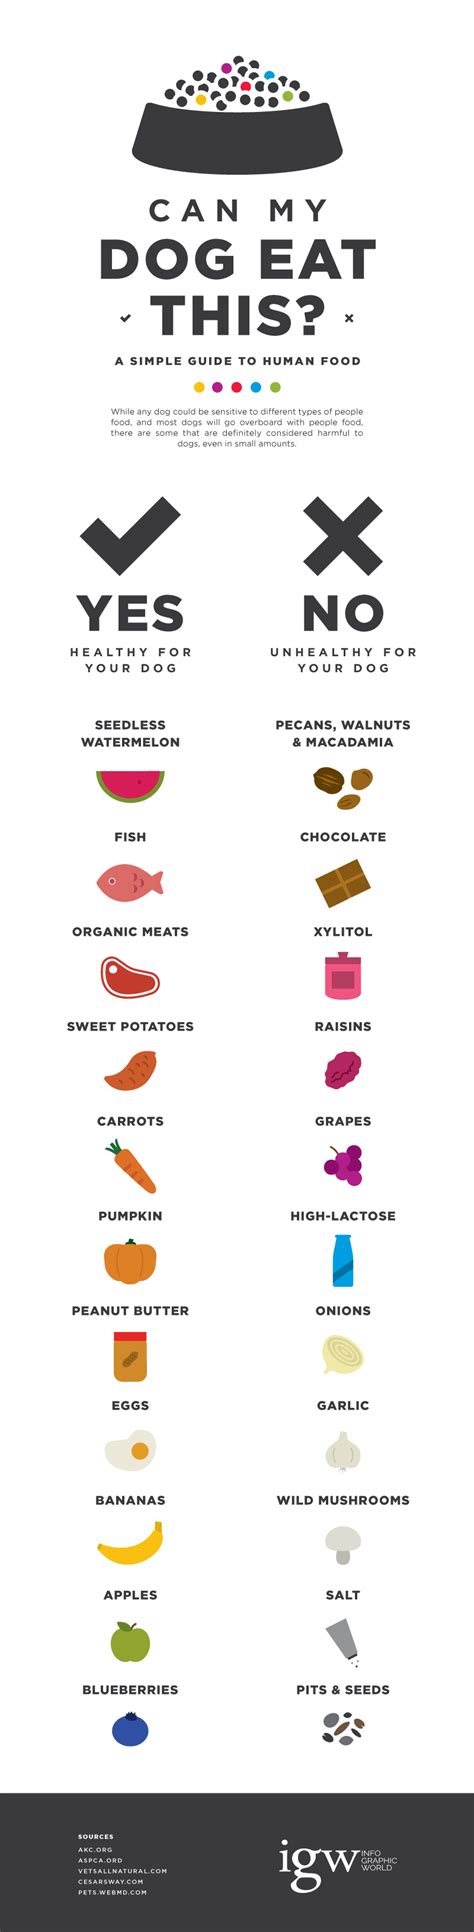 You can select from watermelon, peaches, oranges, lemons, and apples. Guide to What Dogs Can and Cannot Eat - Infographic